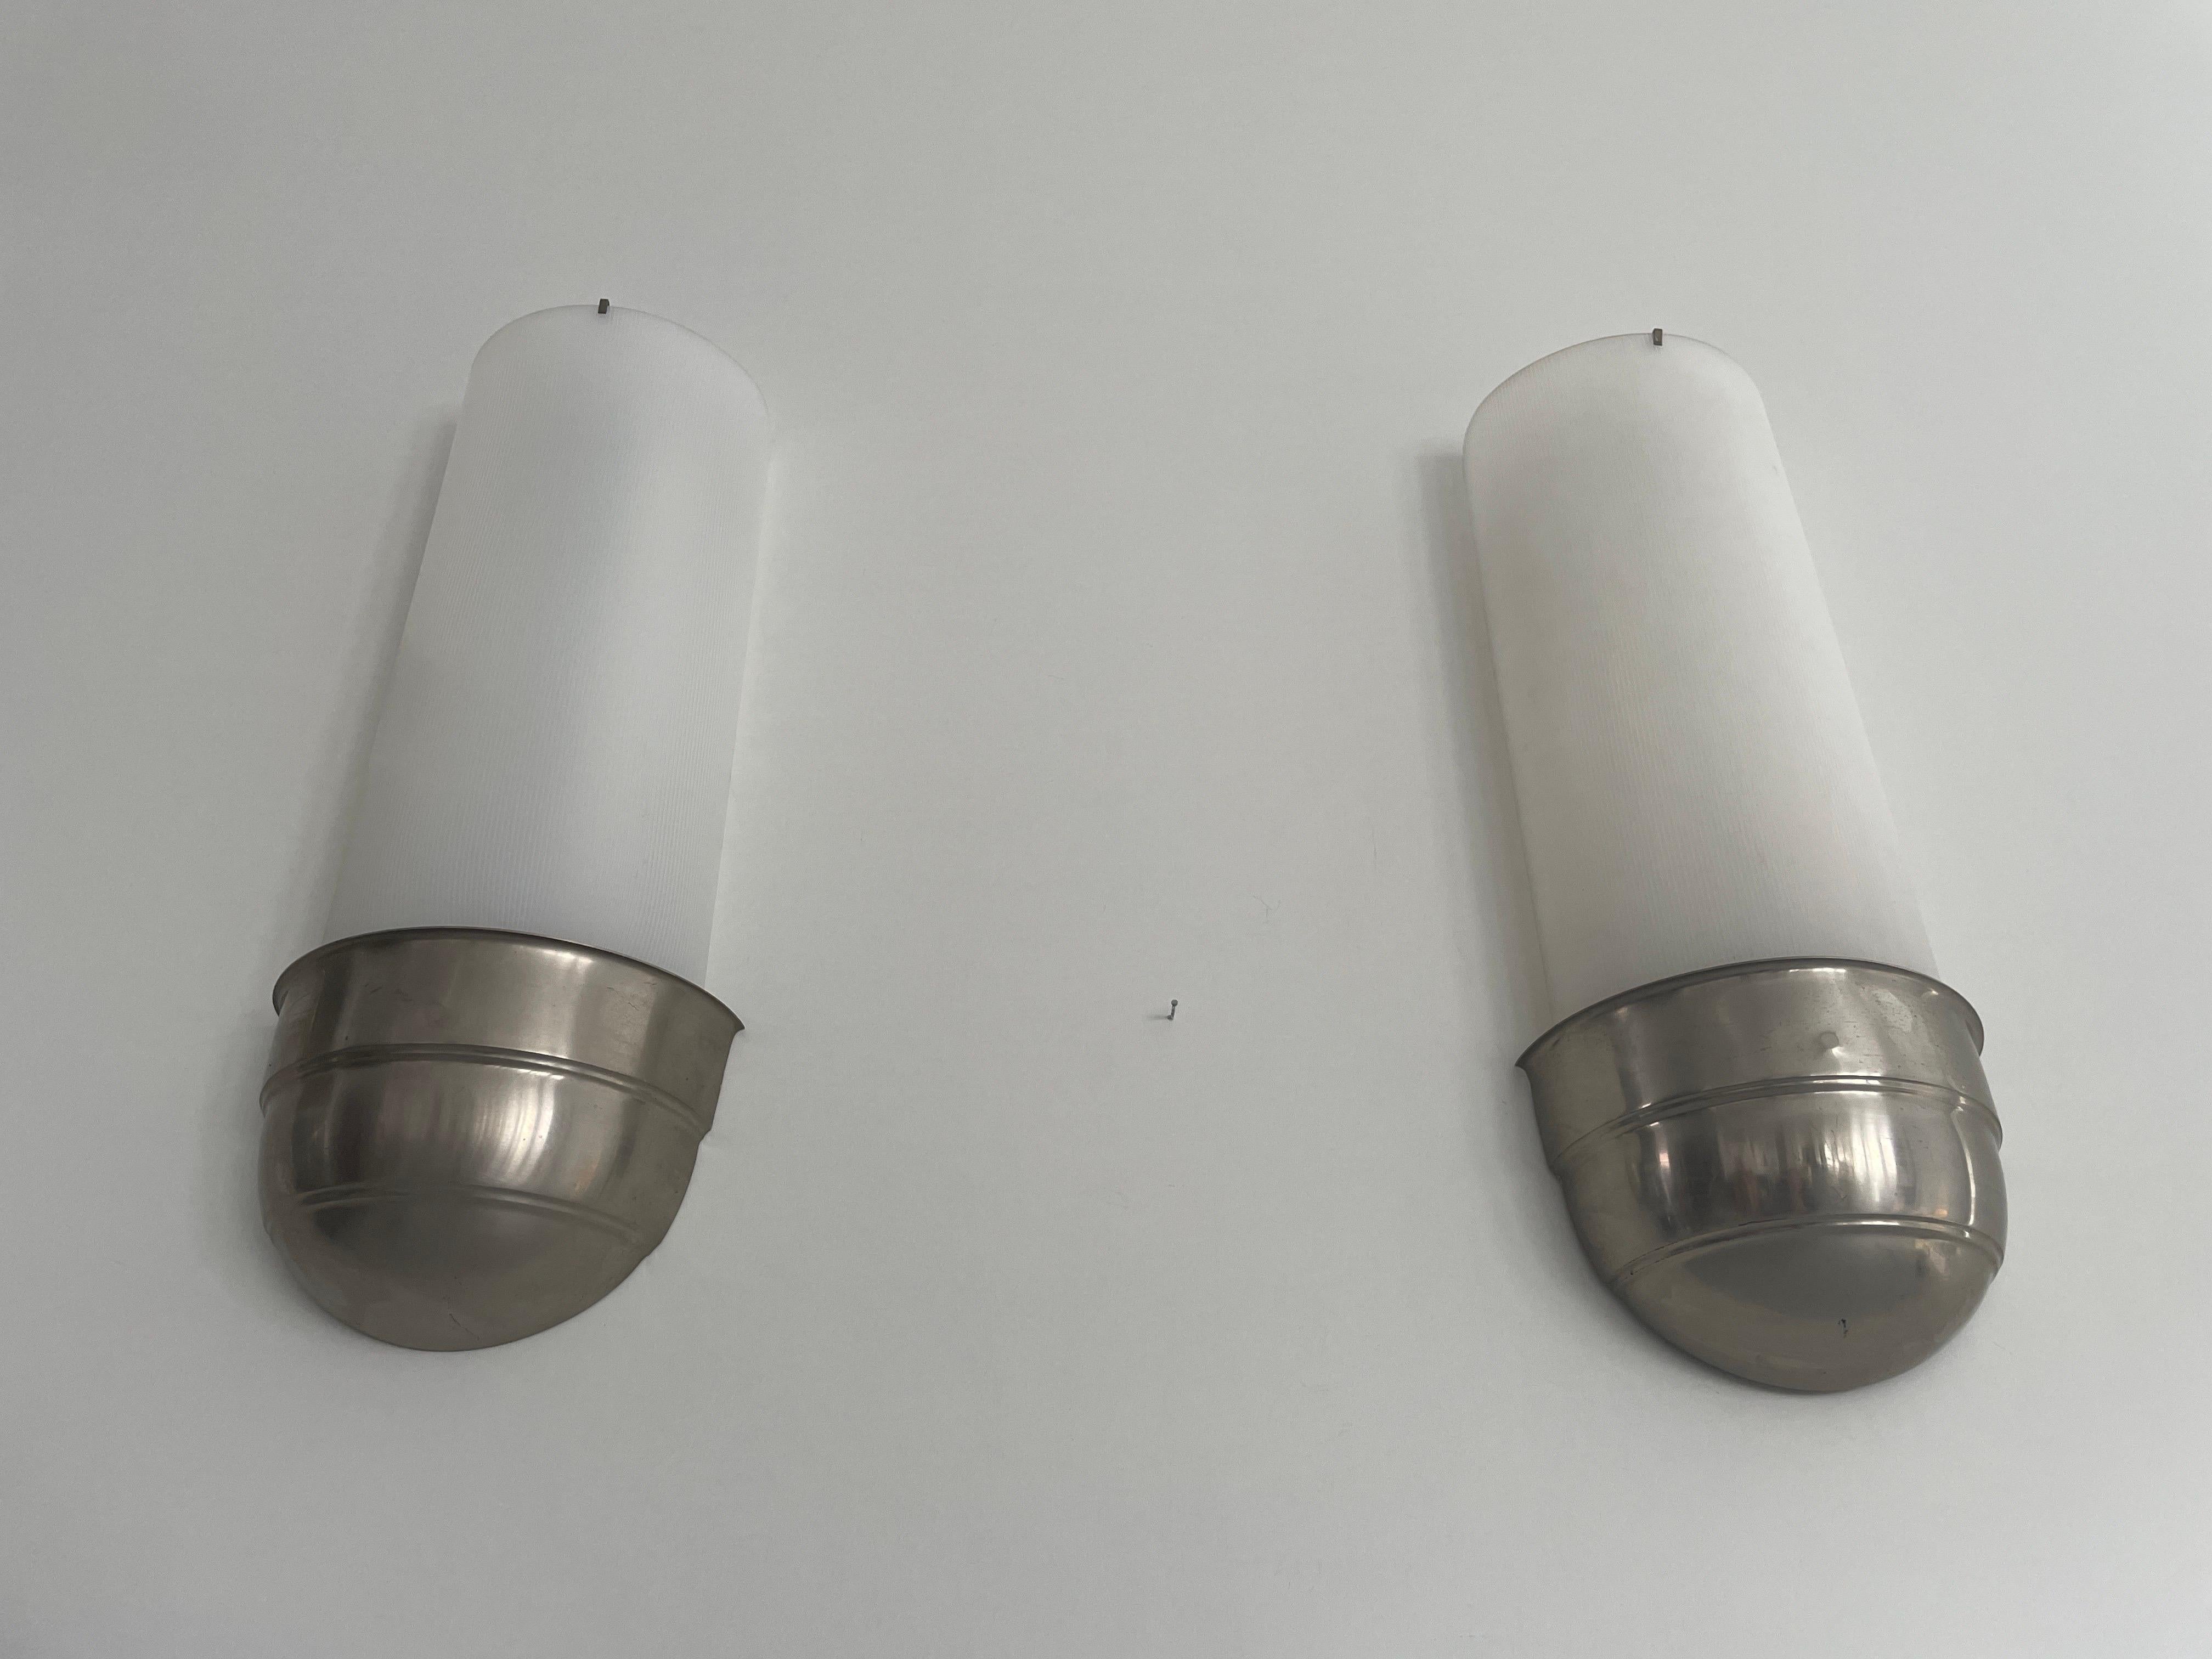 Art Deco Pair of Cinema Sconces, 1940s, Germany

Very nice high quality wall lamps

Plexiglass shades. chrome bases

Lamps are in very good vintage condition.

These lamps works with Halogen Fluorescent tubes POSRAM-L / 16W / 25V
Wired and suitable